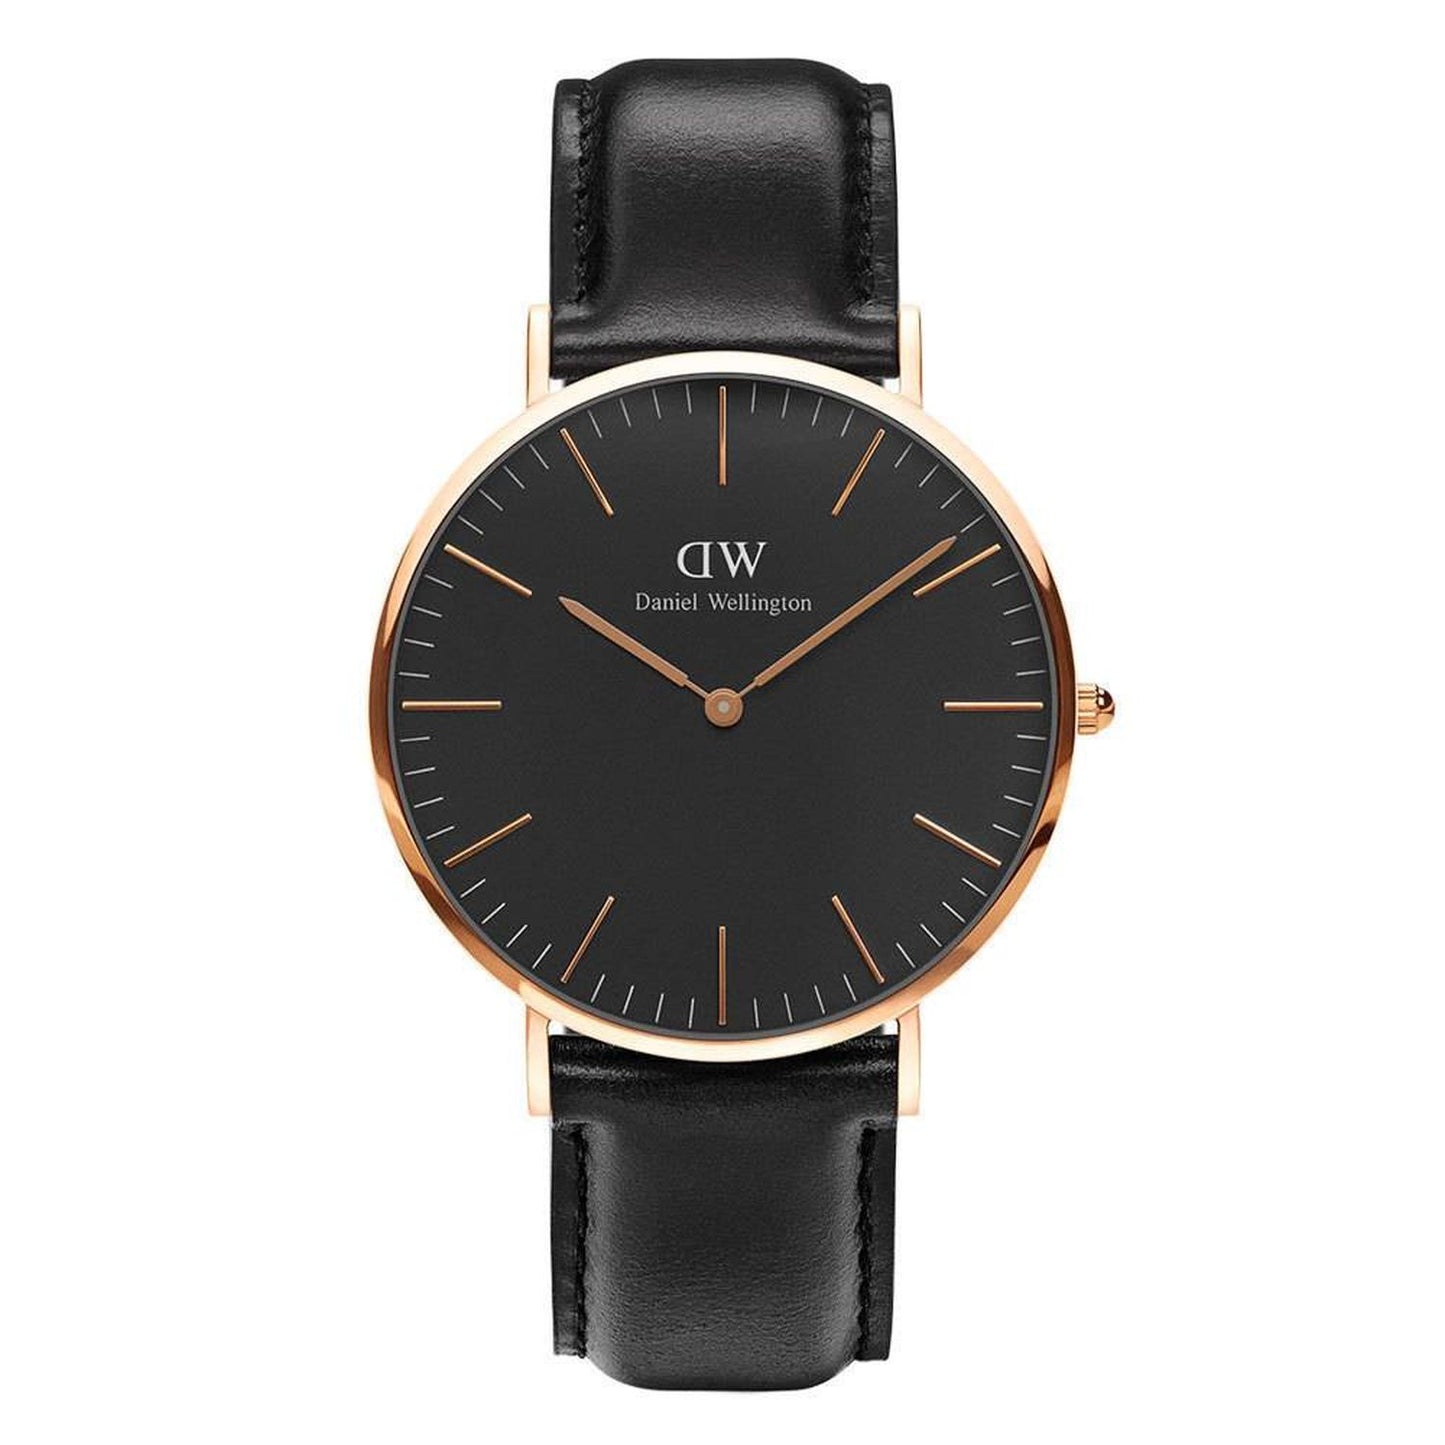 DW Classic Sheffield 40mm - London Time Watches 